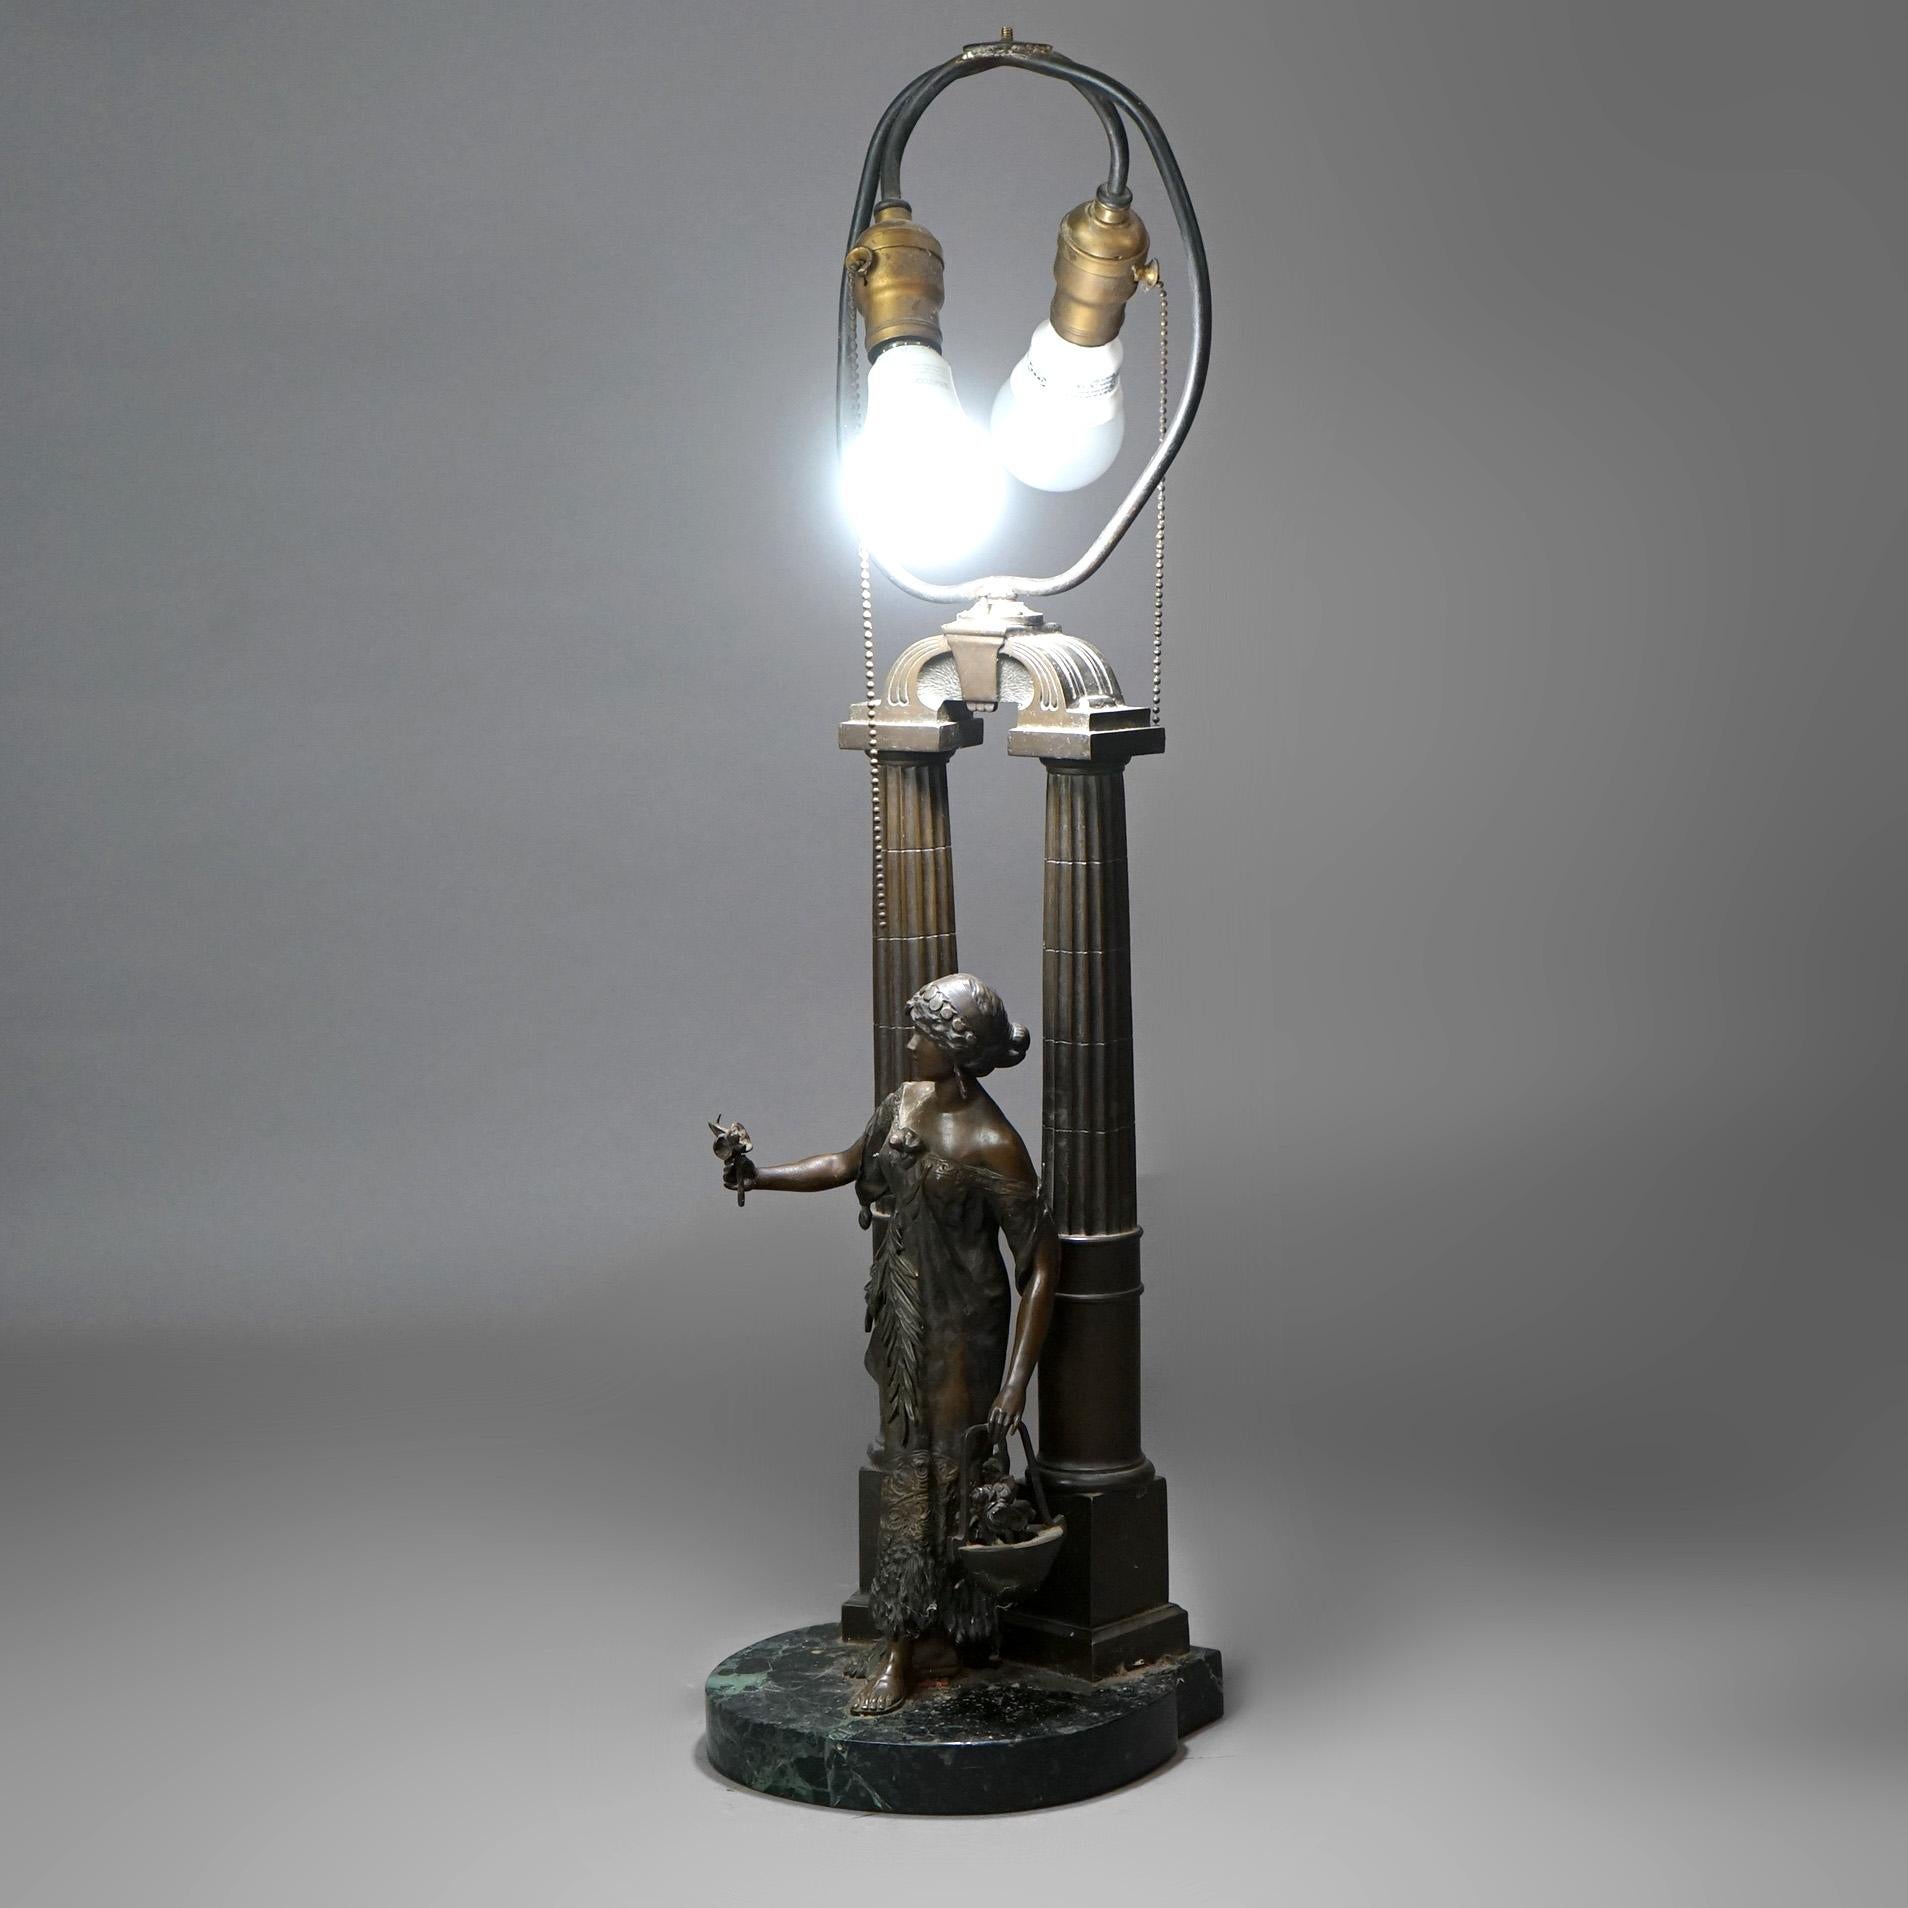 Antique Figural Bronzed Metal Classical Maiden Table Lamp on Marble Plinth c1910 For Sale 2